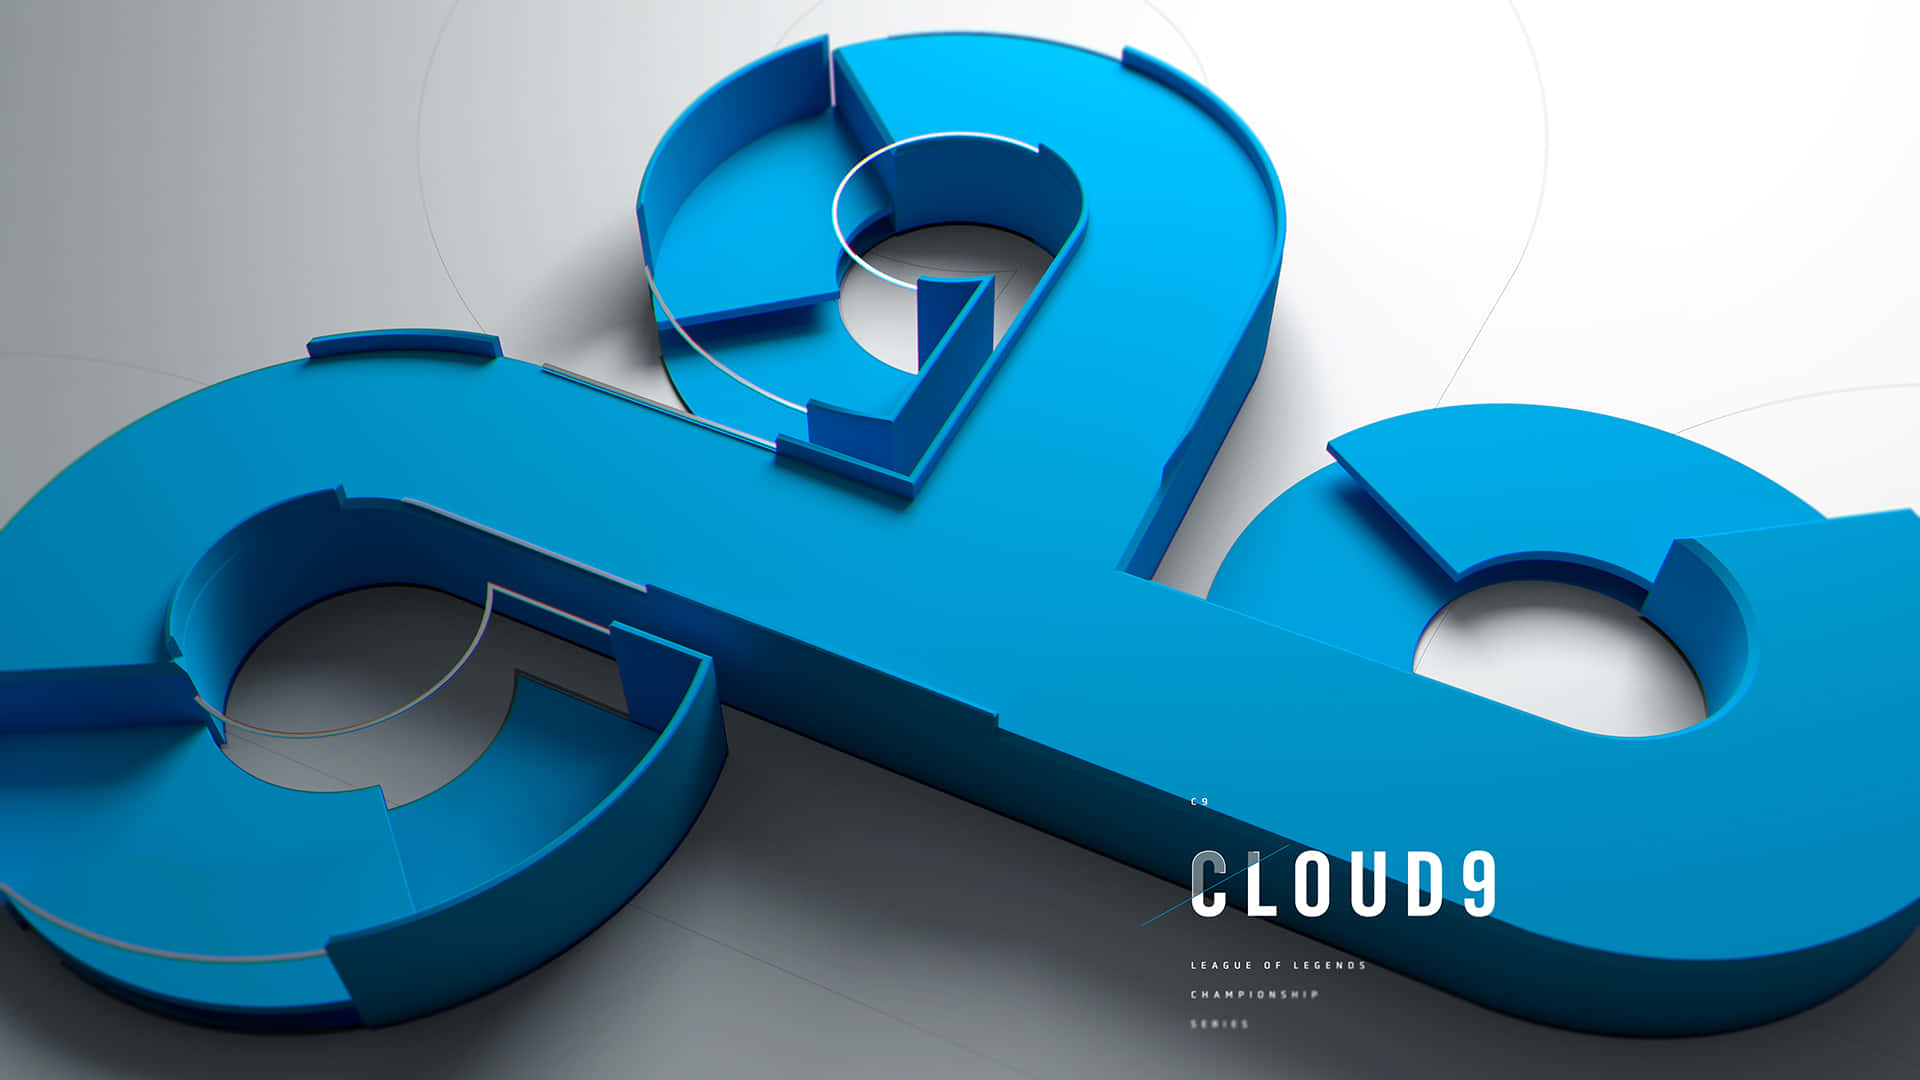 The Incredible Beauty of Cloud 9 Wallpaper